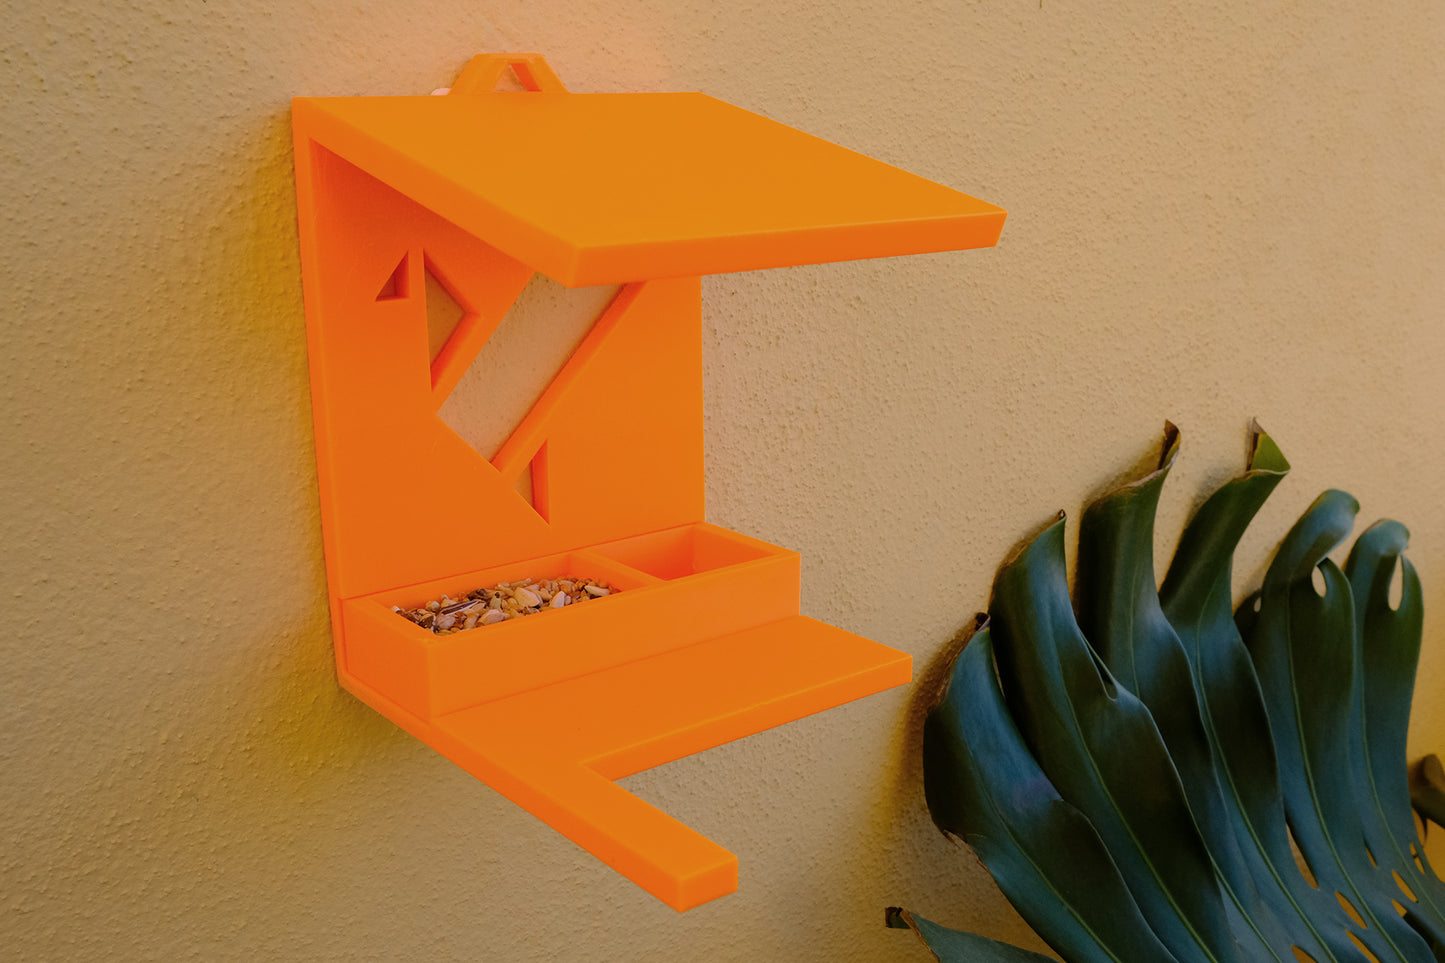 Bird feeder with removable container for food and water.